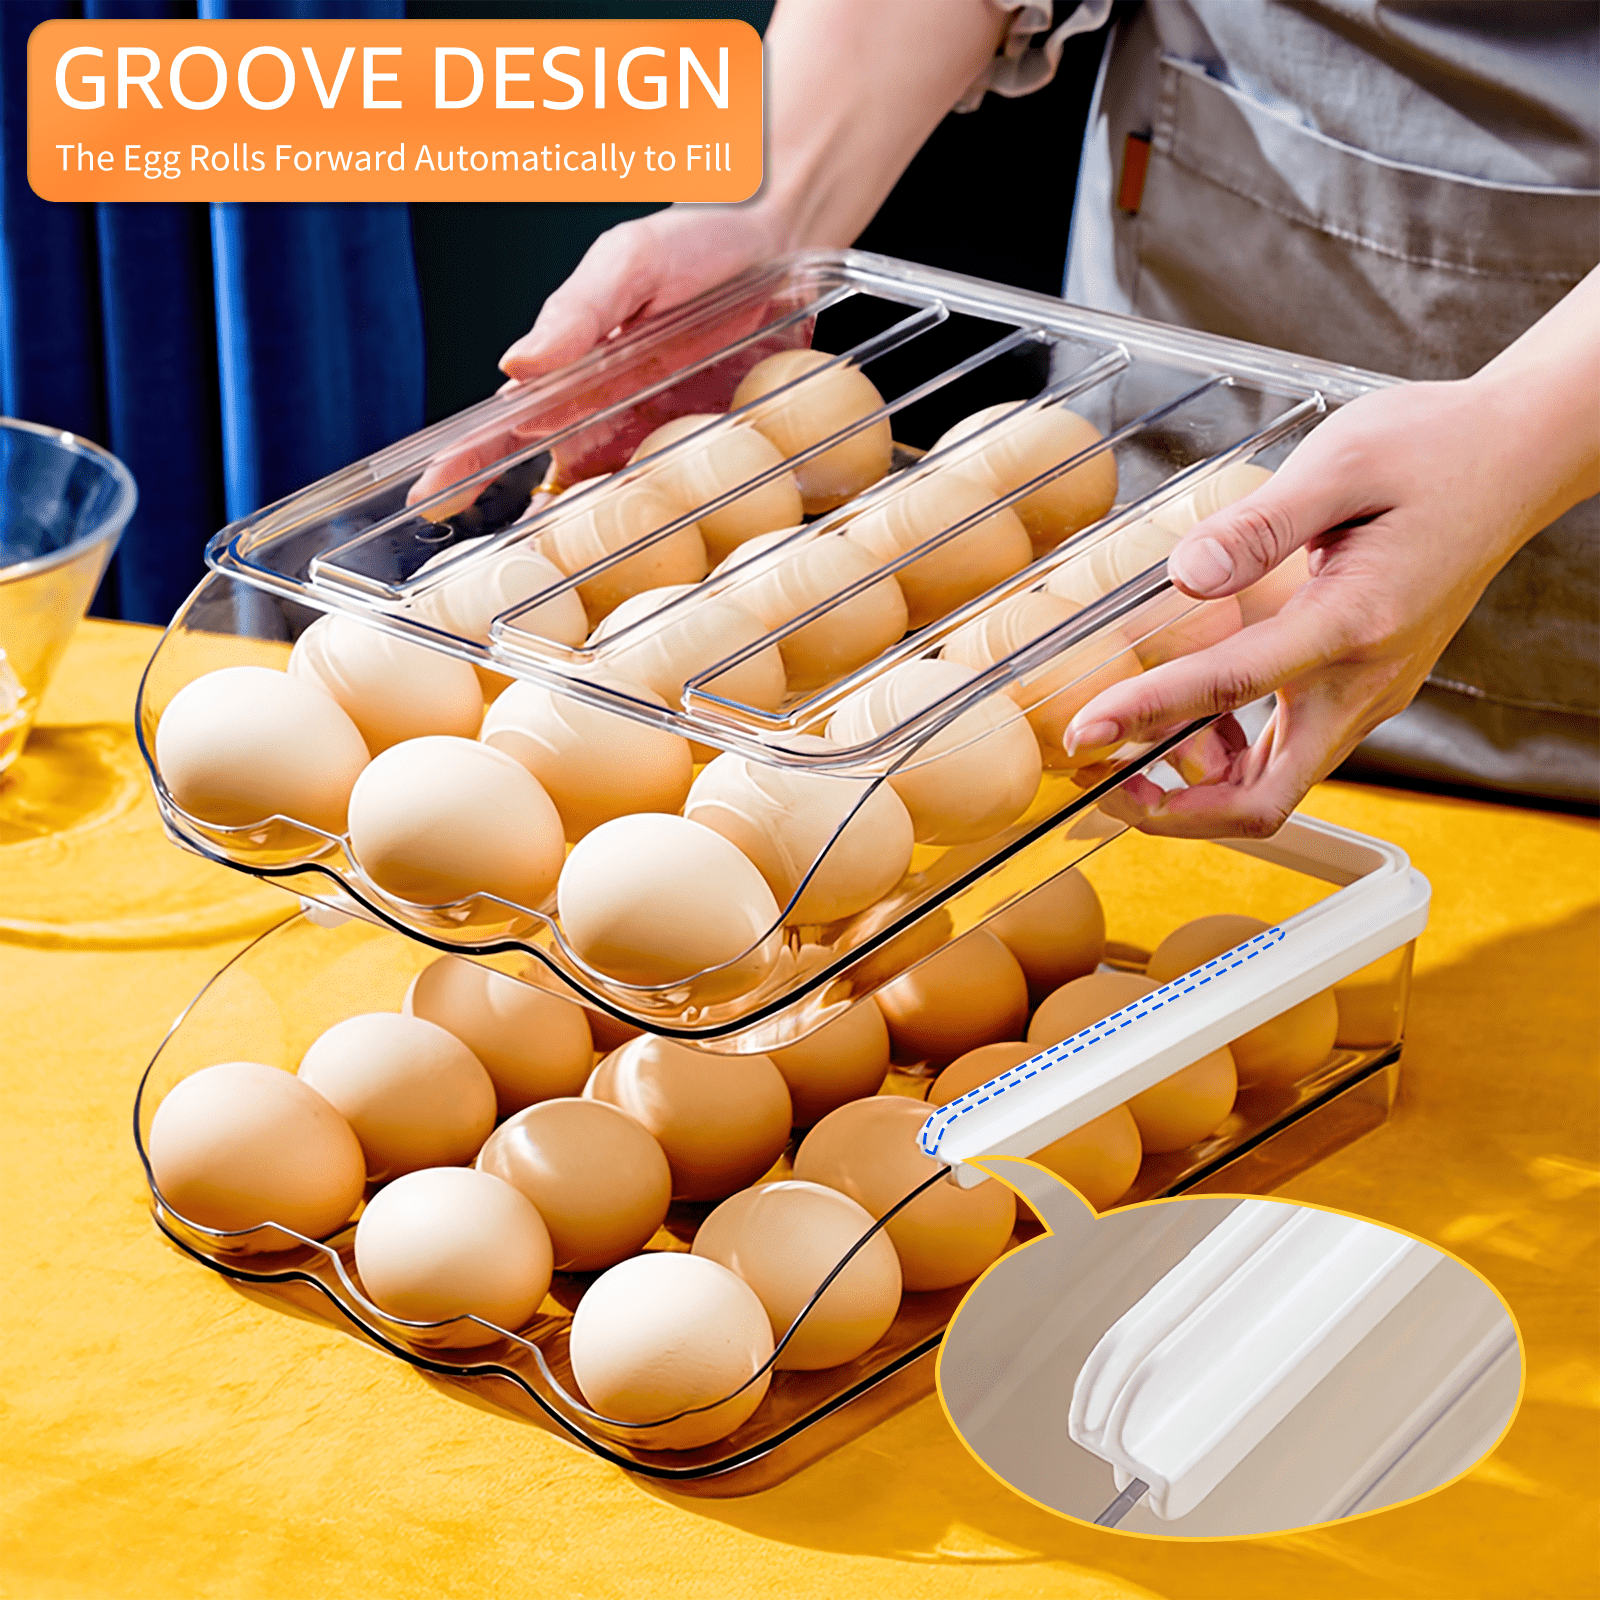  Egg Holder for Refrigerator 3 Layer Egg Storage Container/Box  with Handle Rolling Egg Dispenser Clear Egg Tray Stackable Fridge Organizer  Bins Egg Cartons : Appliances